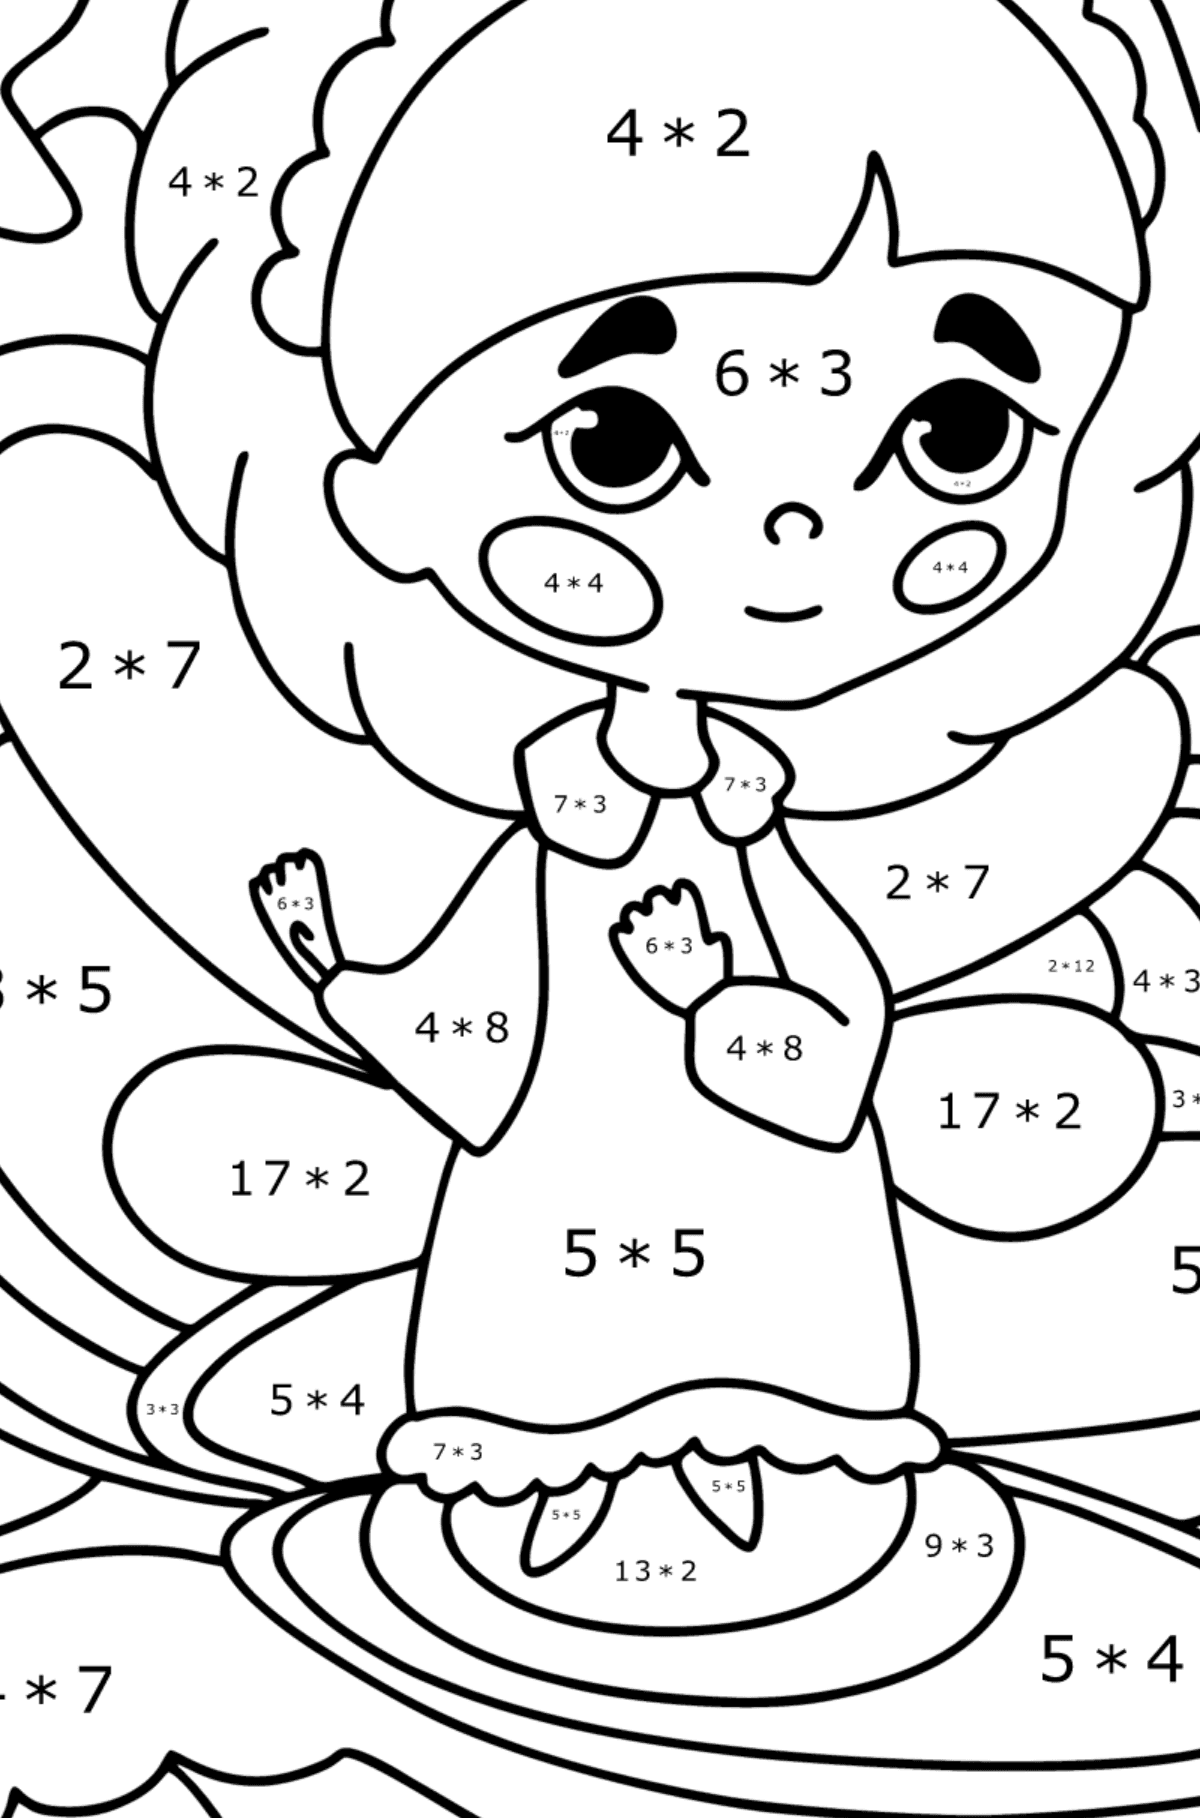 Sea Fairy coloring page - Math Coloring - Multiplication for Kids